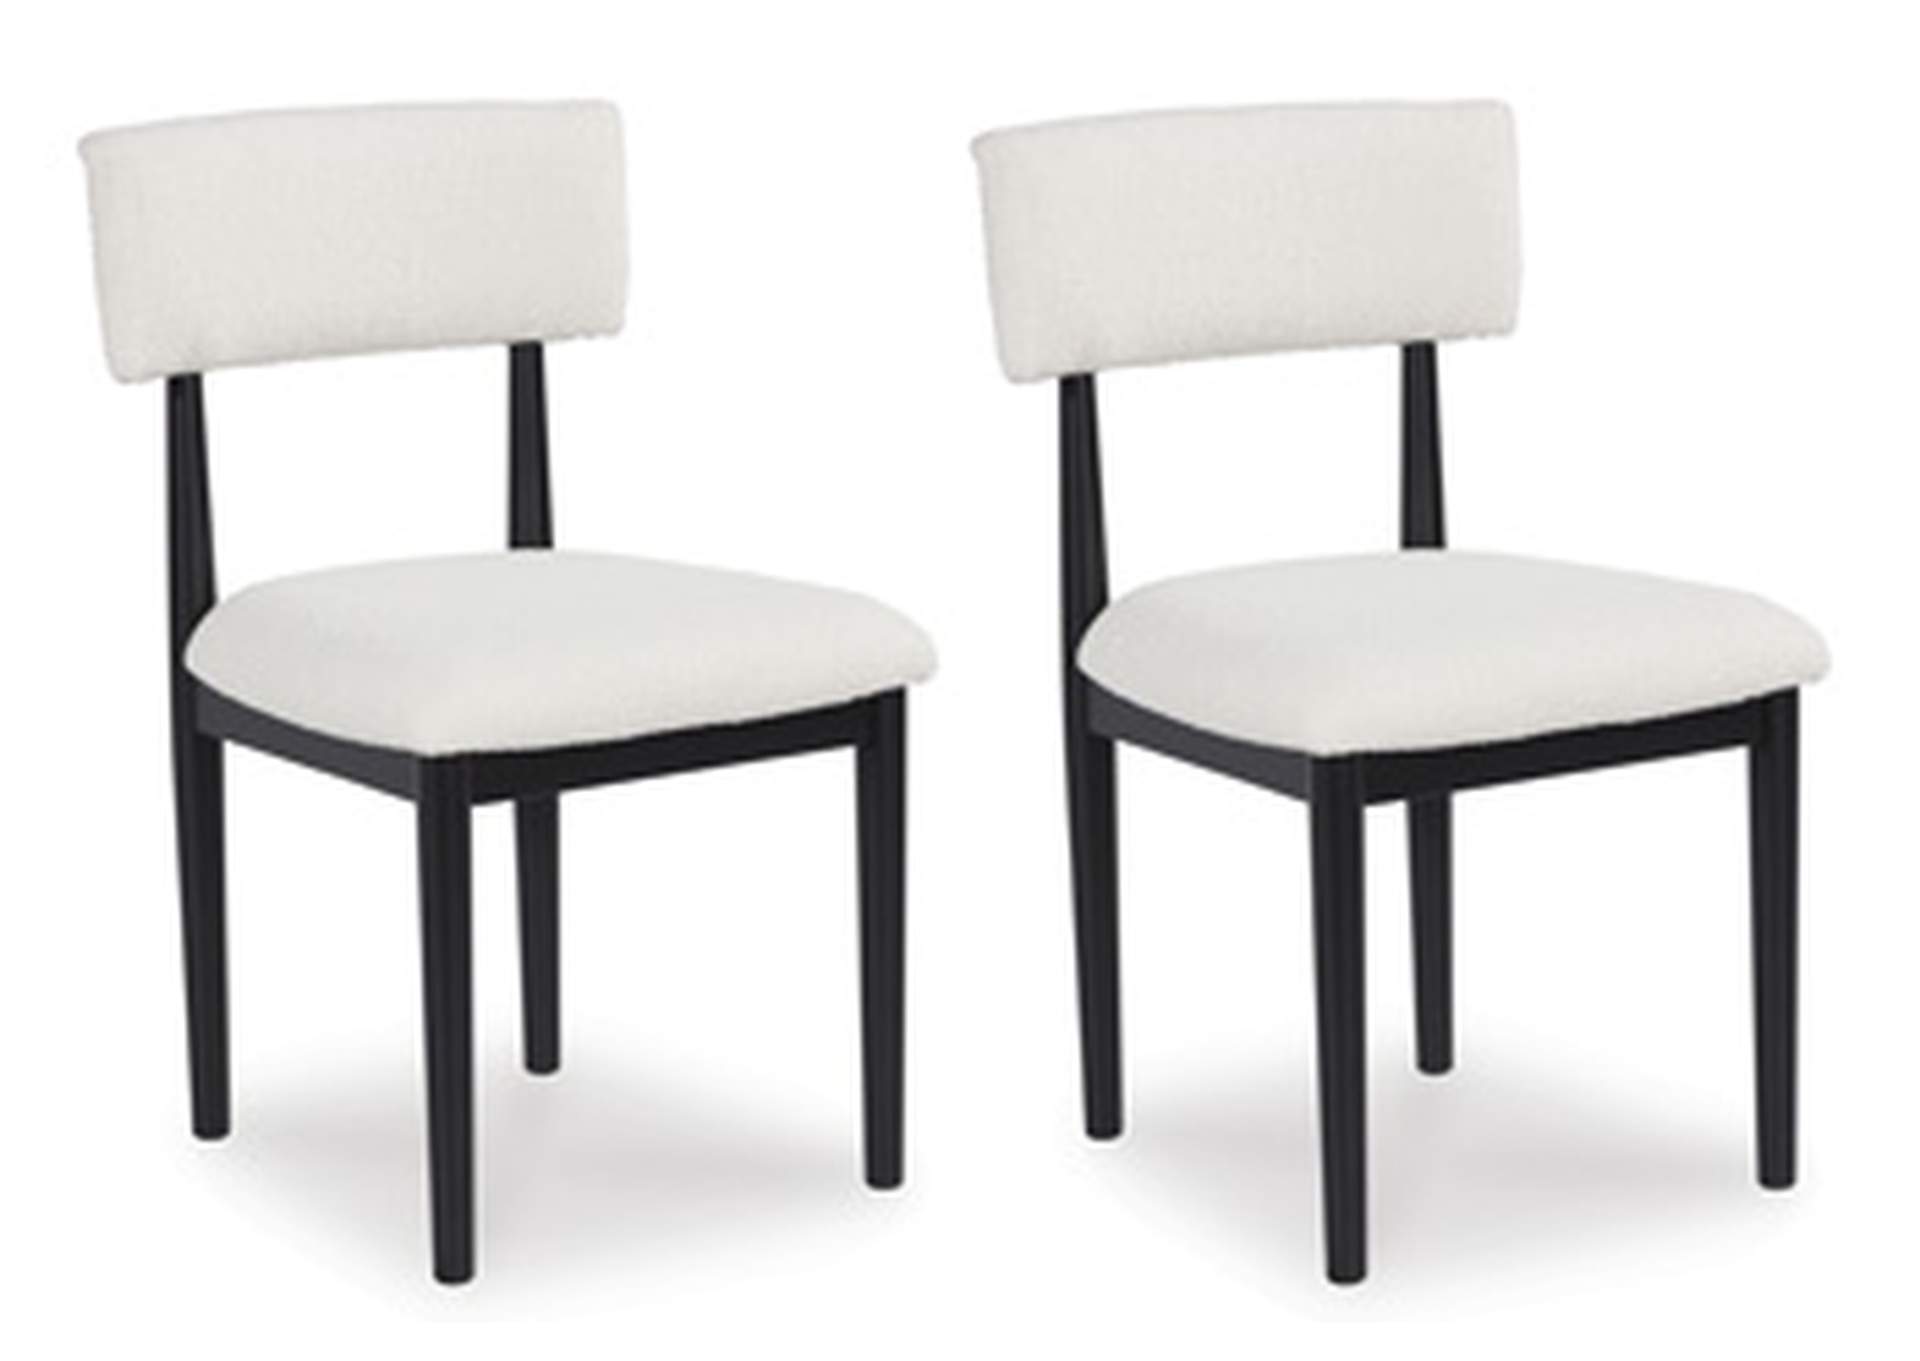 Xandrum Dining Chair,Signature Design By Ashley